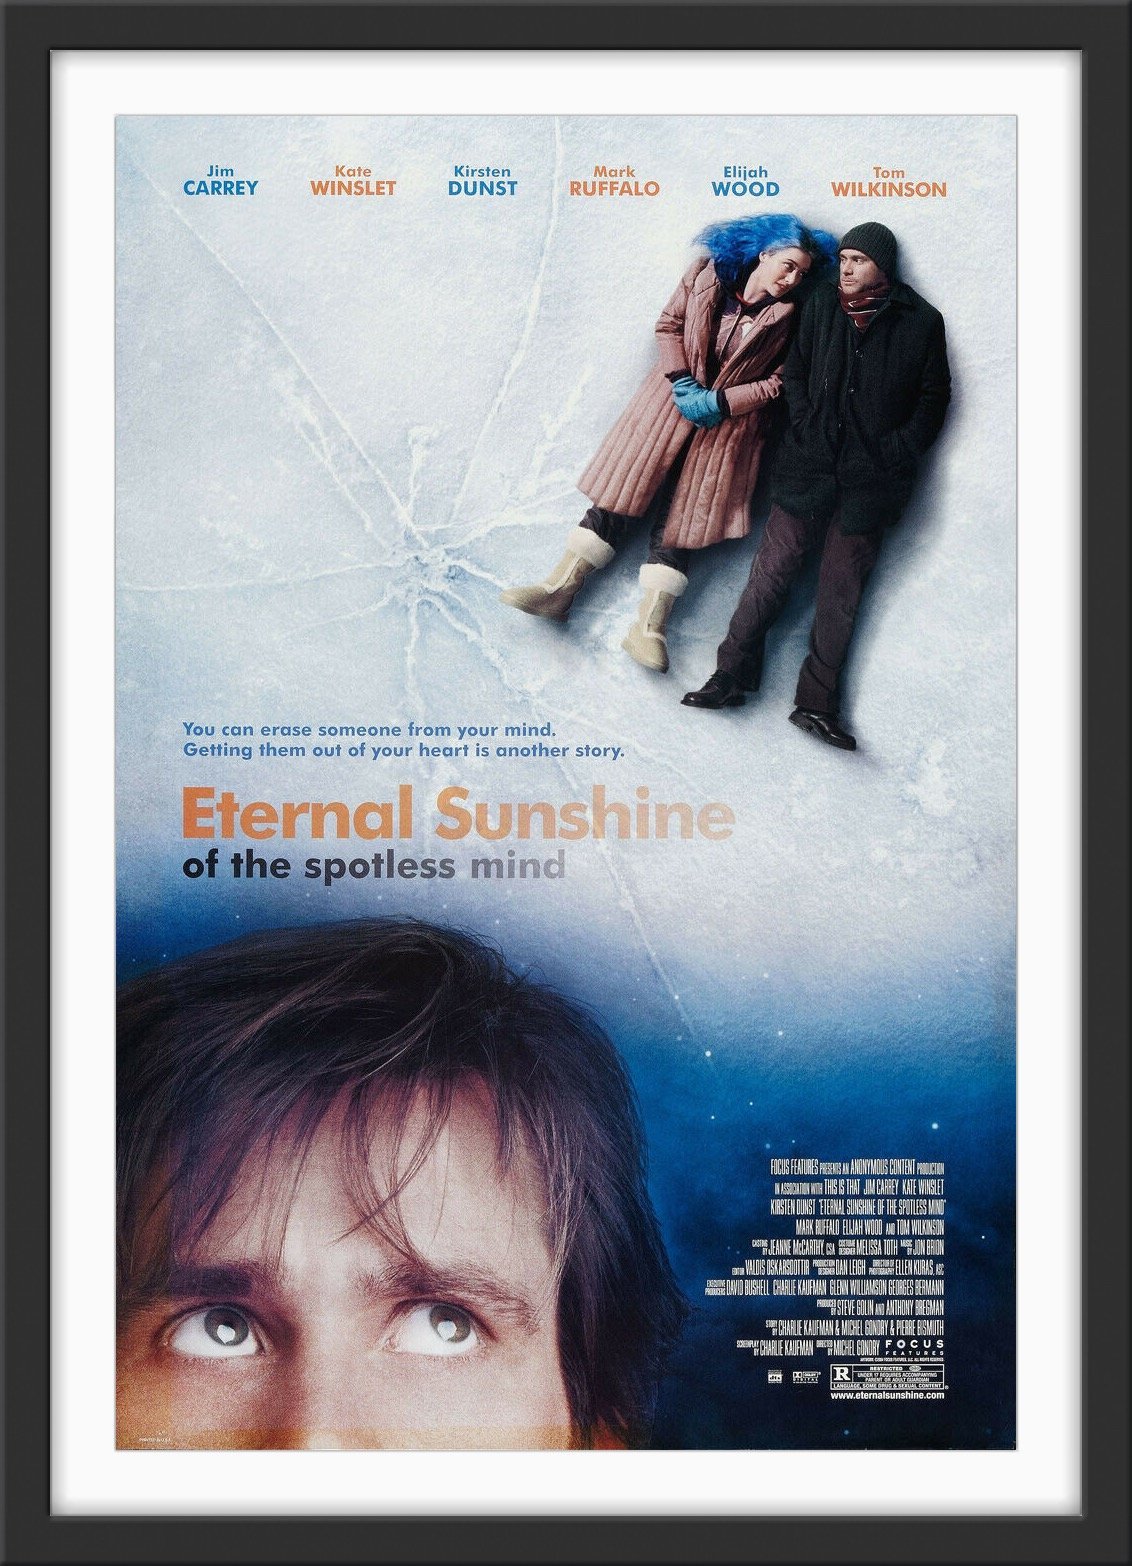 An original movie poster for the film Eternal Sunshine of the Spotless Mind